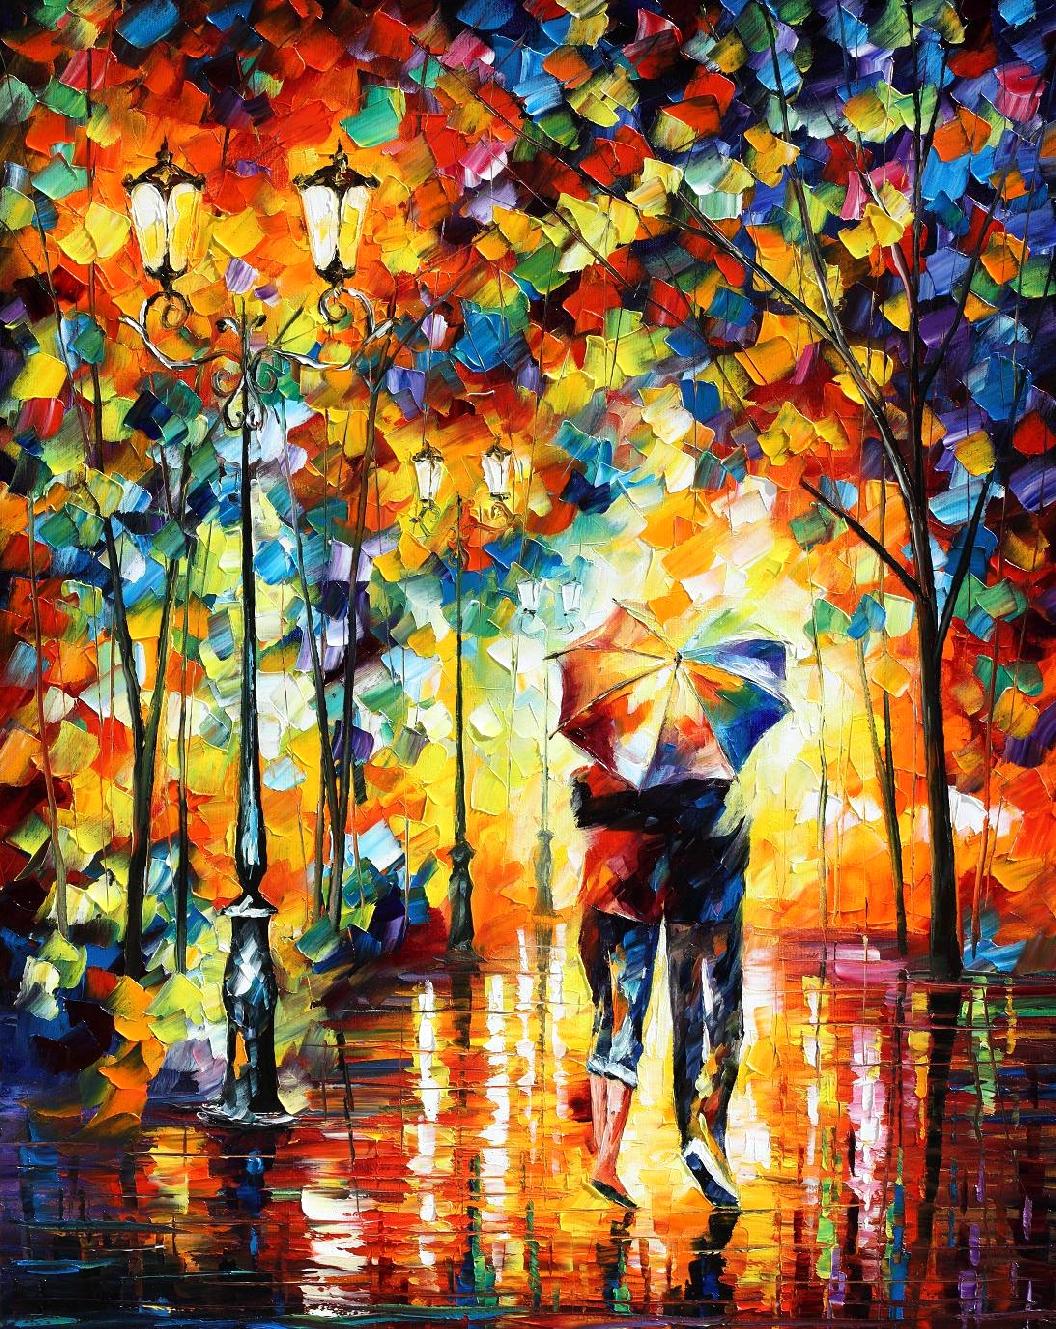 Under One Umbrella, Leonid Afremov – Painting You With Words